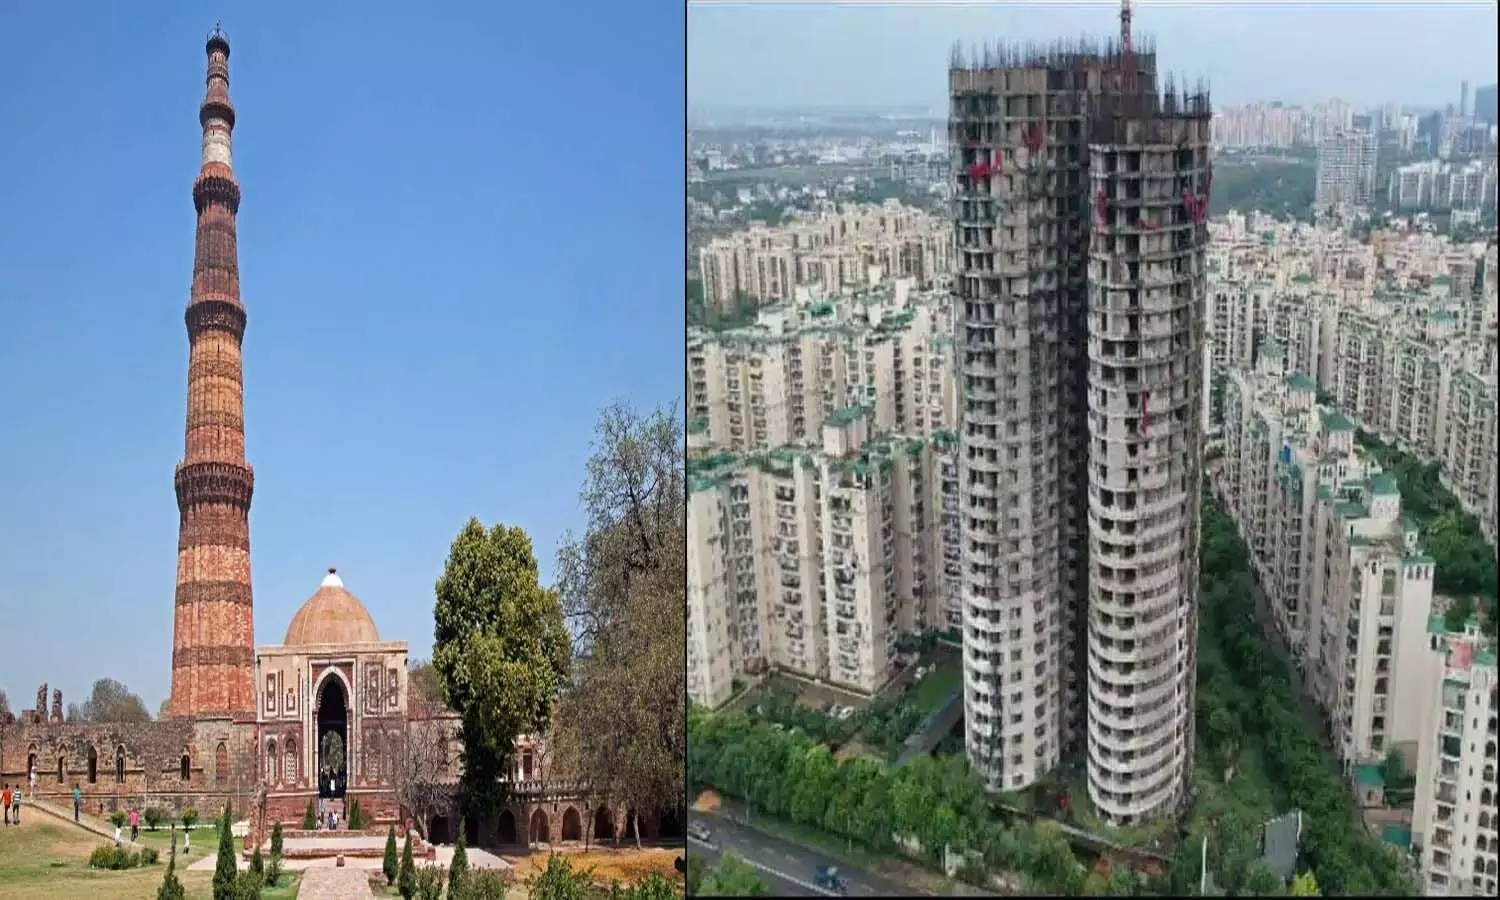 Twin tower is taller than Qutub Minar, know the process of demolition, effects and concerns